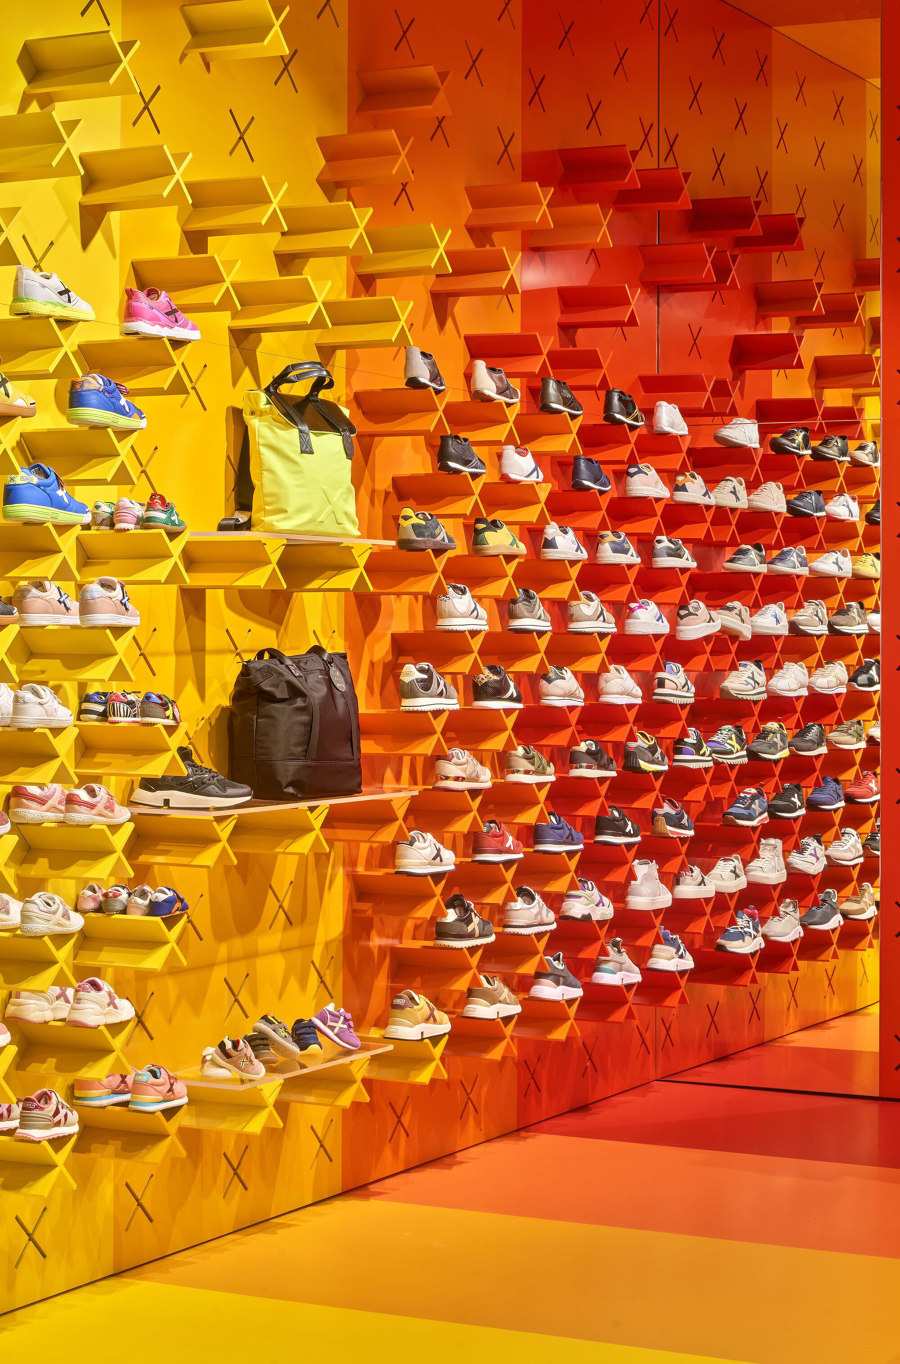 Tread lightly: shoe stores with brand-focused lighting concepts | Novedades